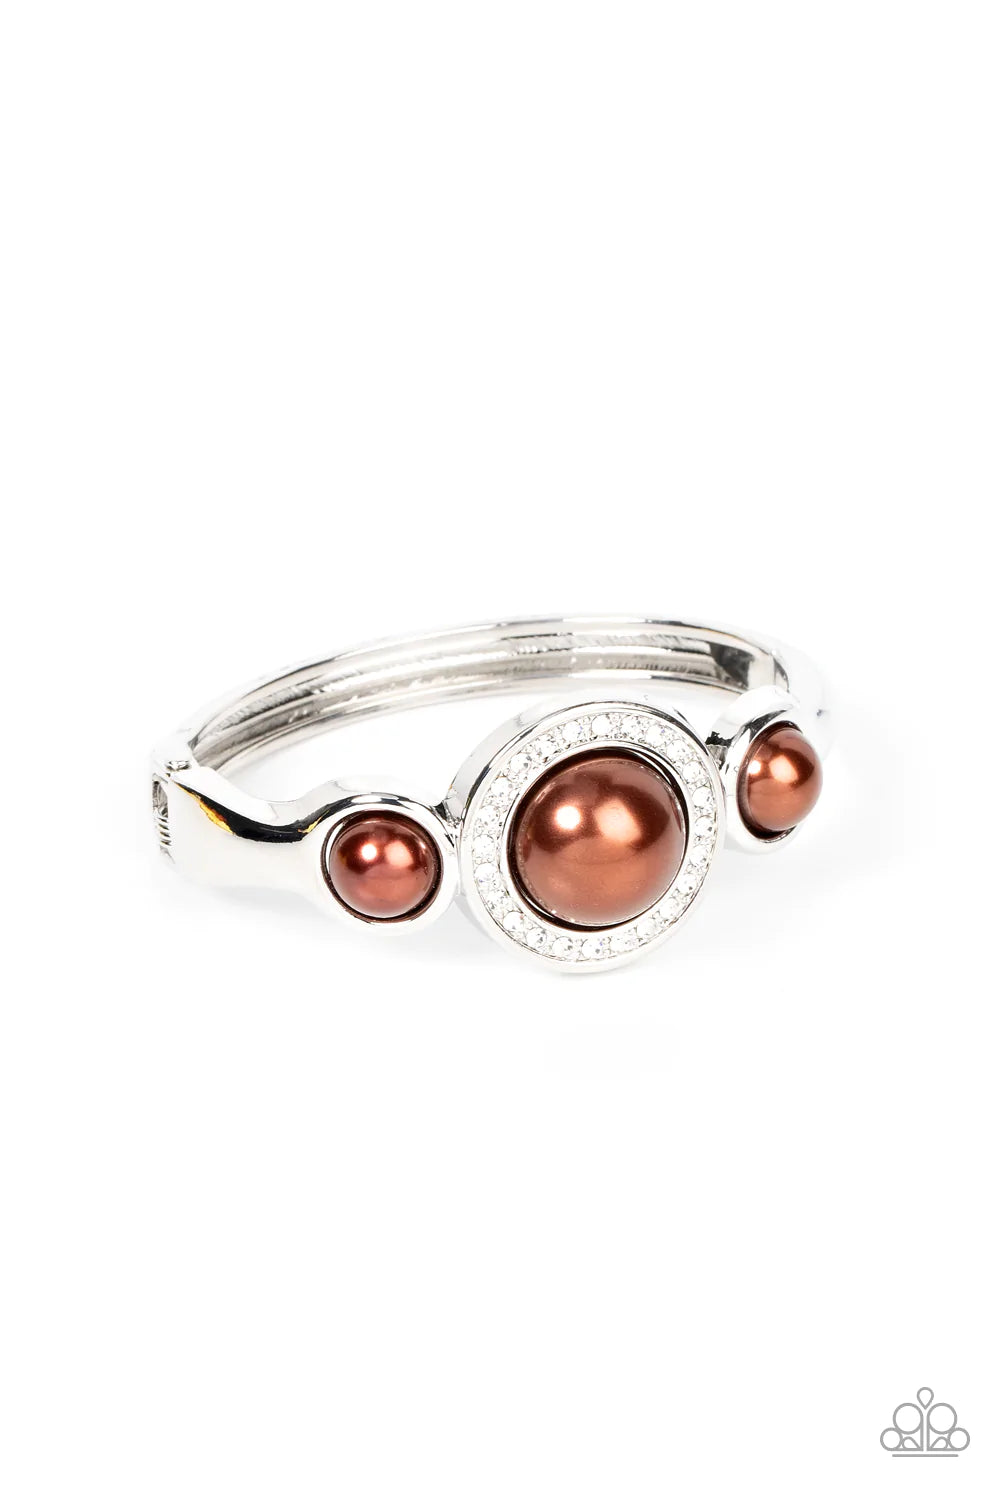 Paparazzi Accessories Debutante Daydream - Brown Encircled in a glitzy ring of glassy white rhinestones, an oversized brown pearl is flanked by a pair of bubbly brown pearl fittings atop a classic silver bangle-like bracelet for a timeless twist. Features